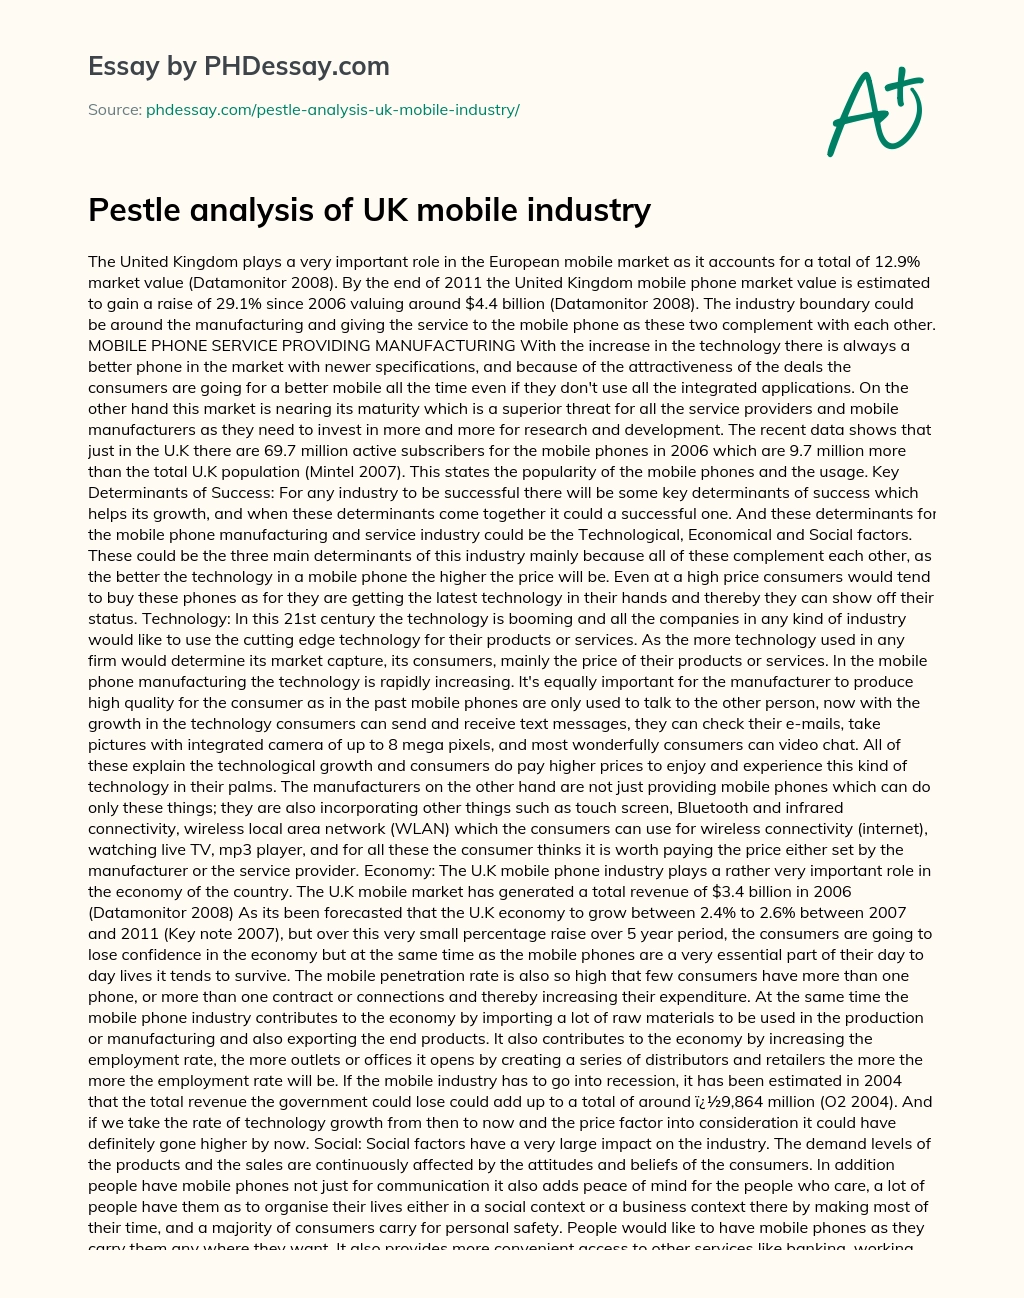 Pestle Analysis of UK Mobile Industry essay